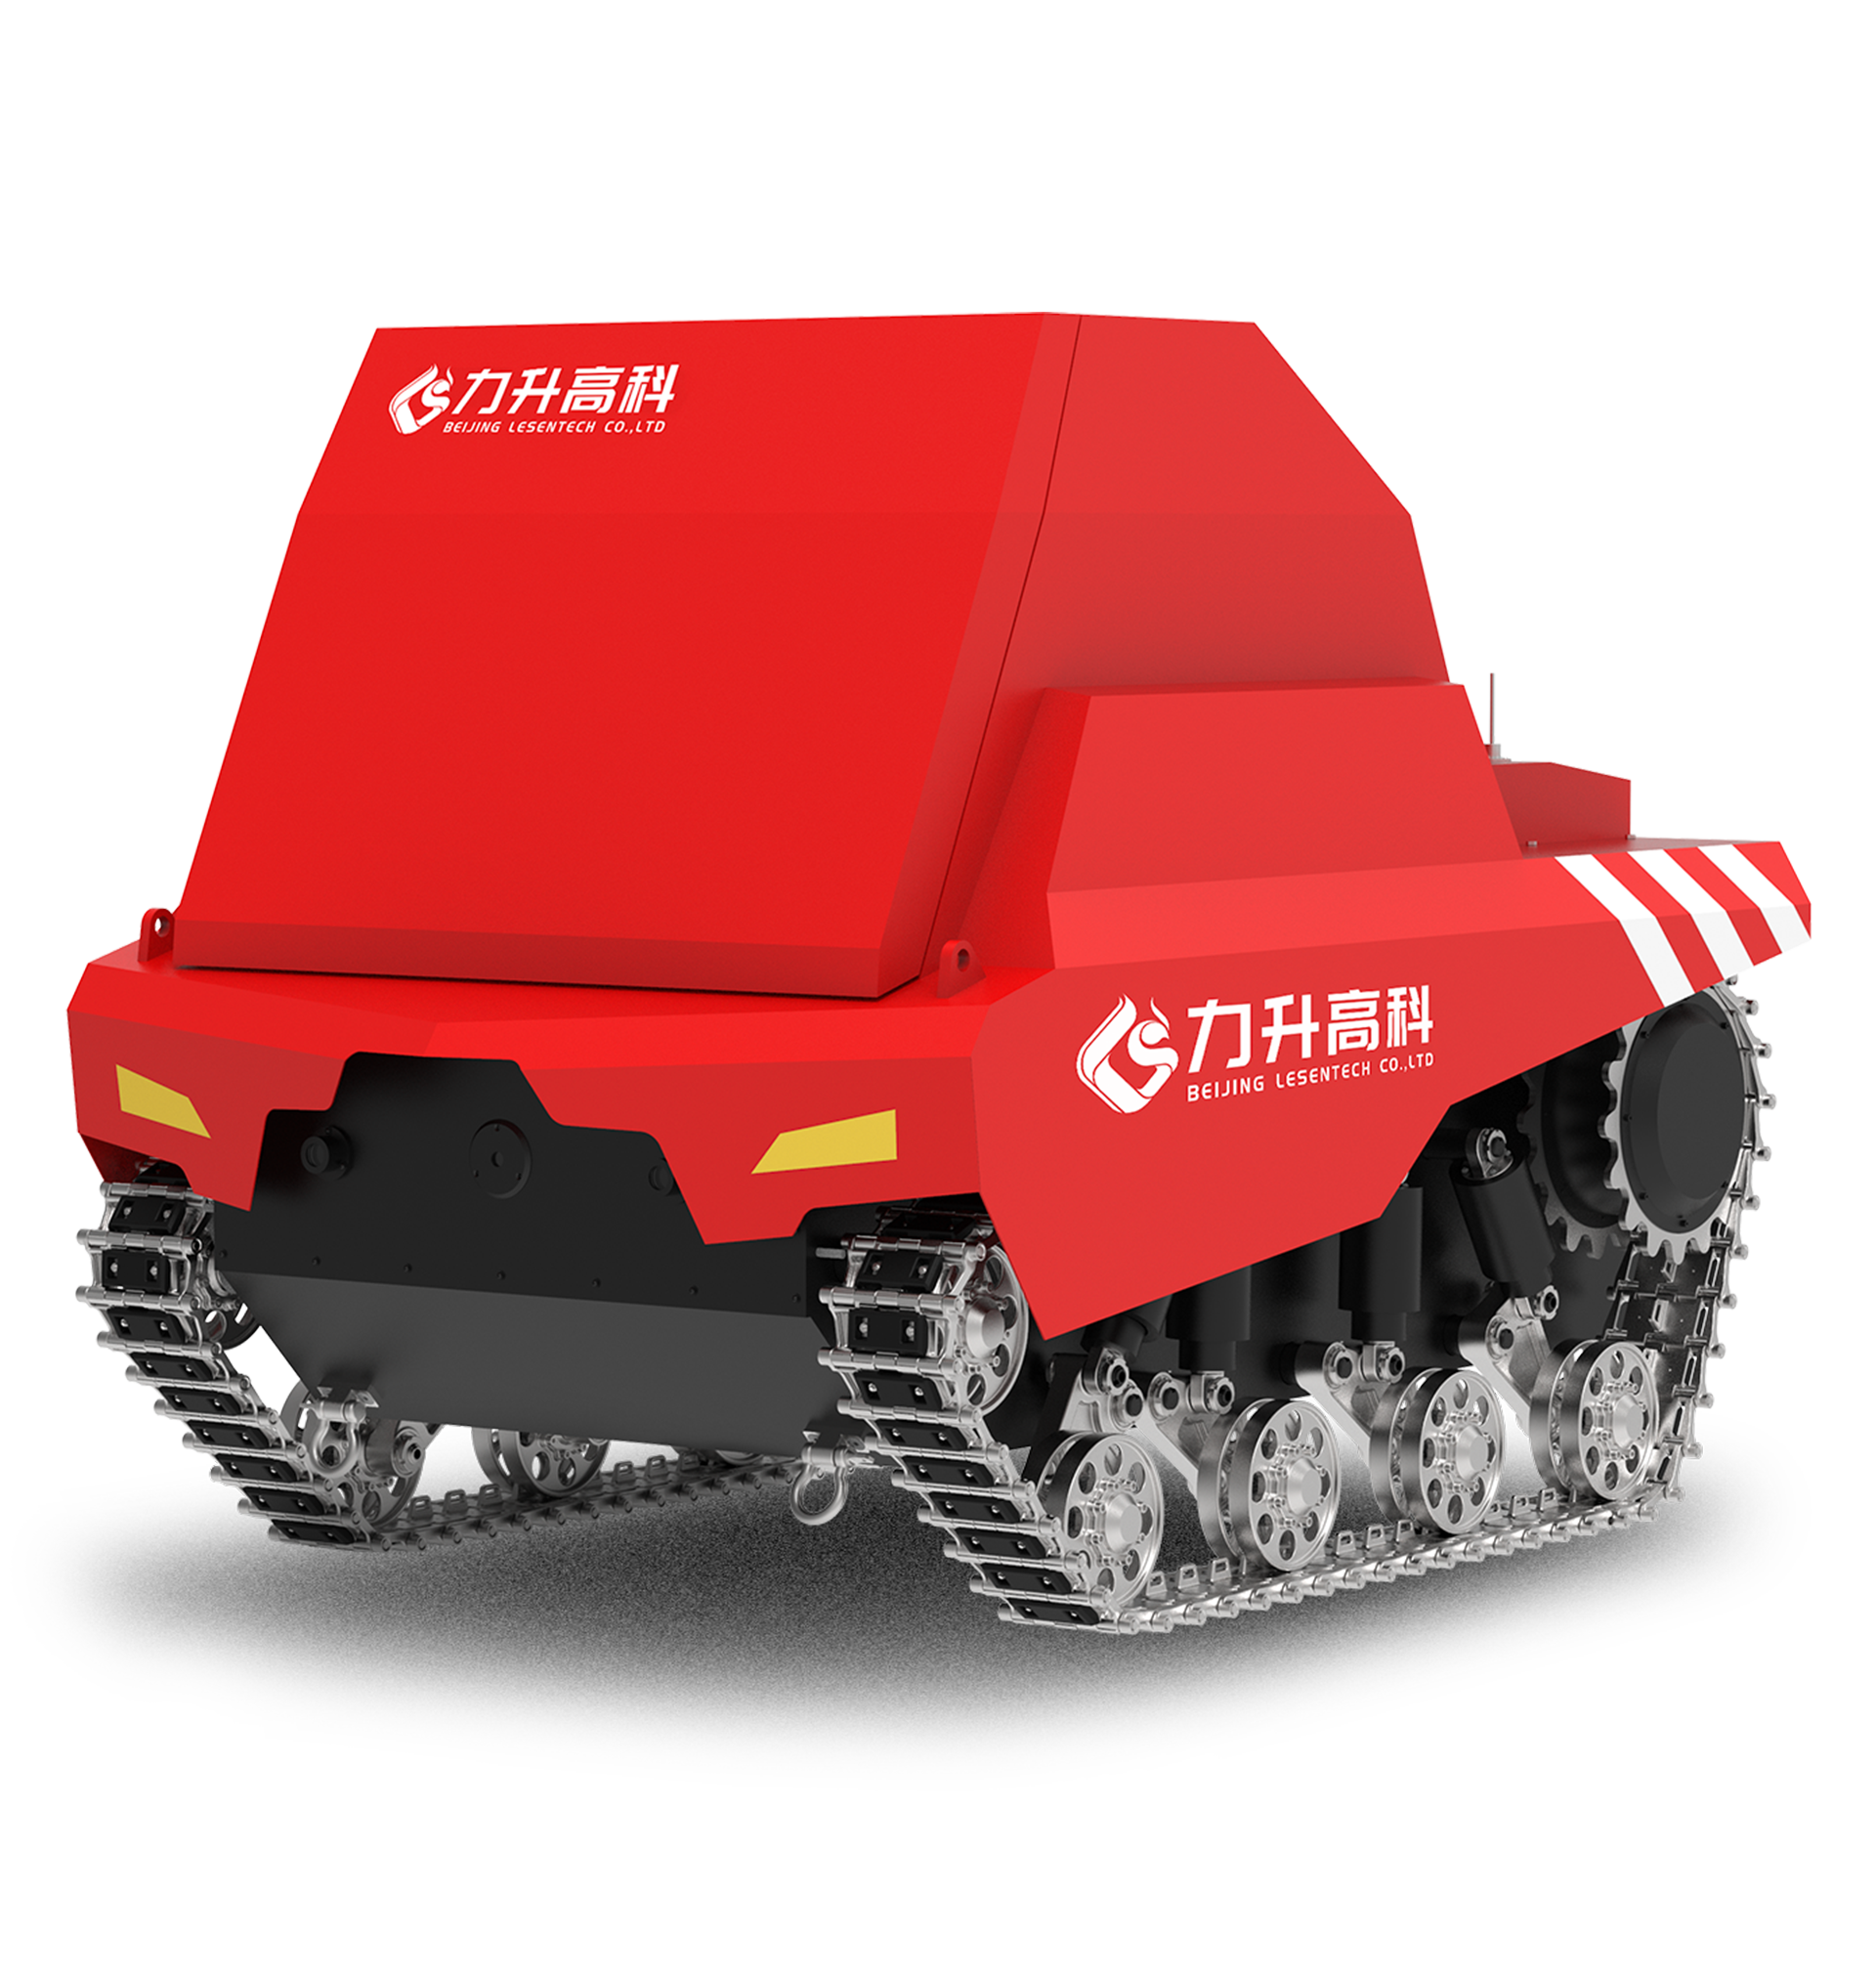 1000 ℃ High-Temperature Resistant Fire-Fighting Robot